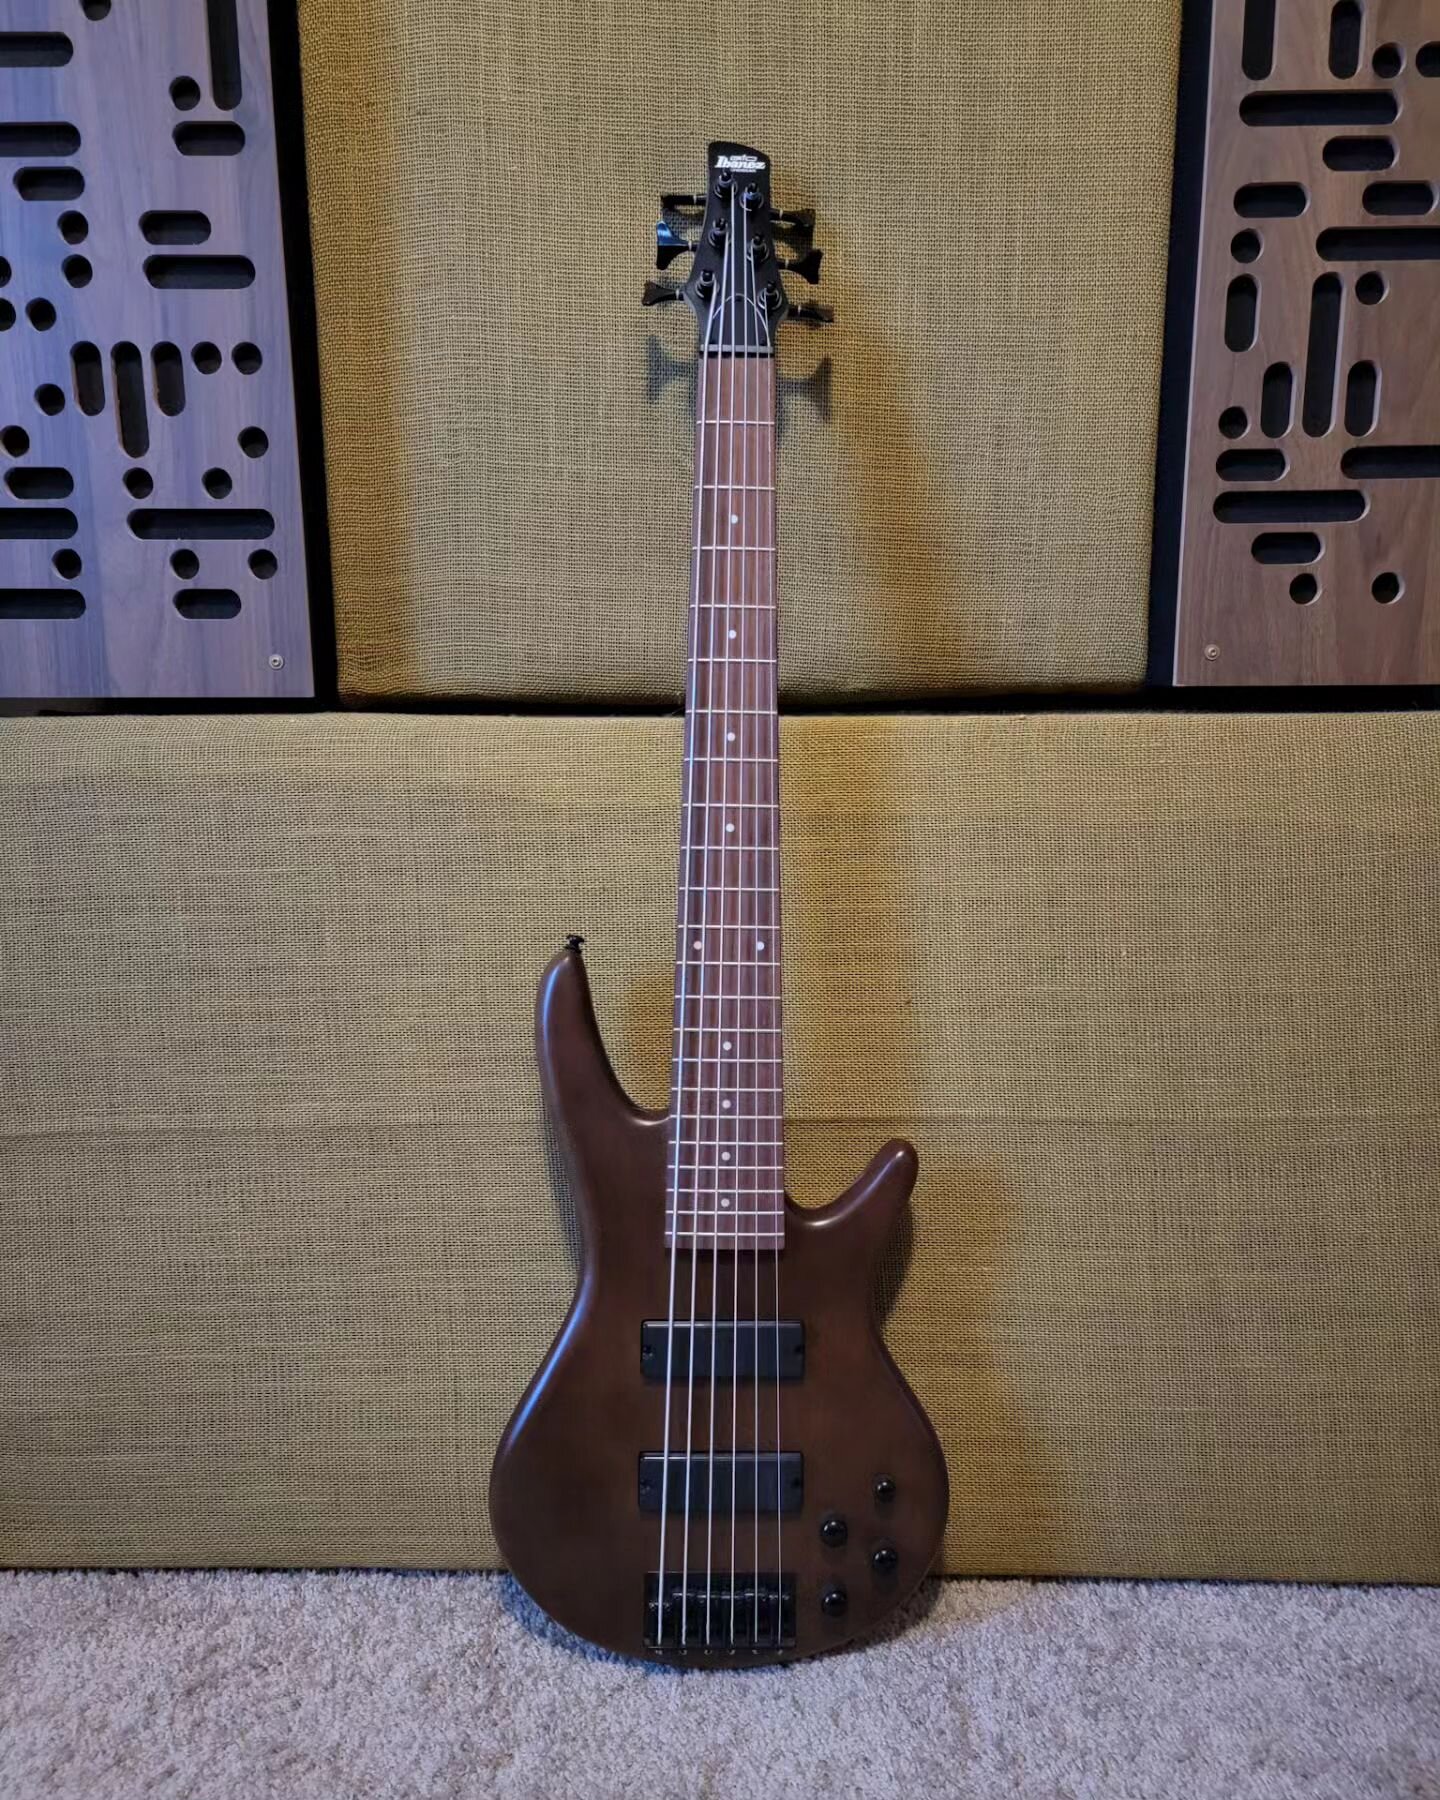 Looking forward to finally using this &quot;novelty&quot; bass on a gig. I got it because I wasn't sure if I would ever be a 6-string bass guy, and @ibanez stuff is always so well-built (my first was an SR300 in 1996). It's inexpensive, but sounds gr